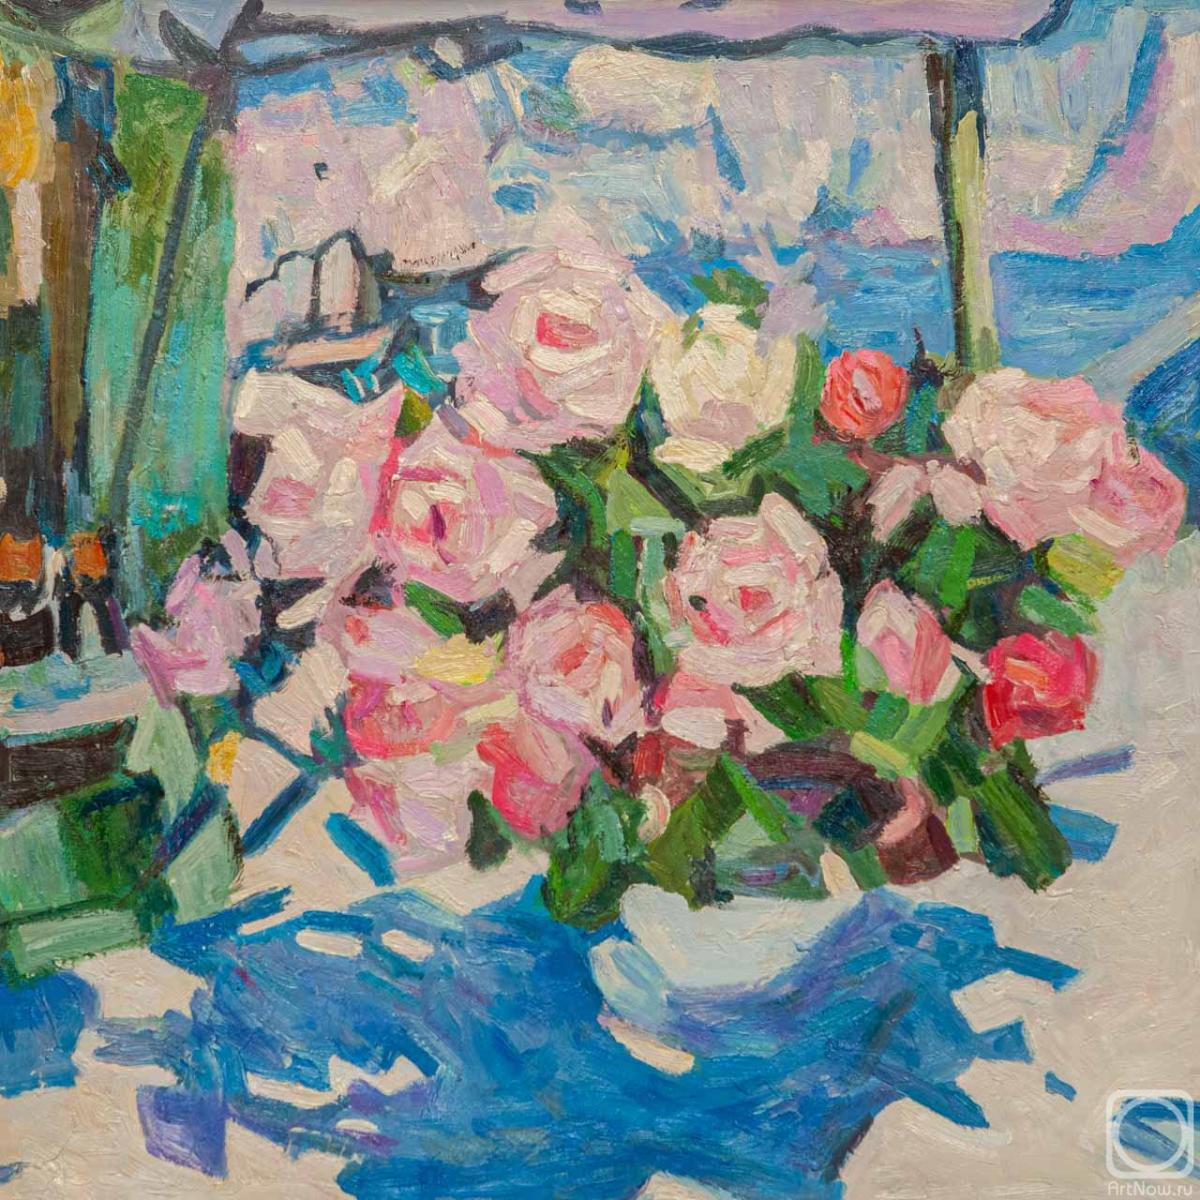 Kamskij Savelij. A free copy of the painting by Konstantin Korovin *Roses. A bouquet by the sea*